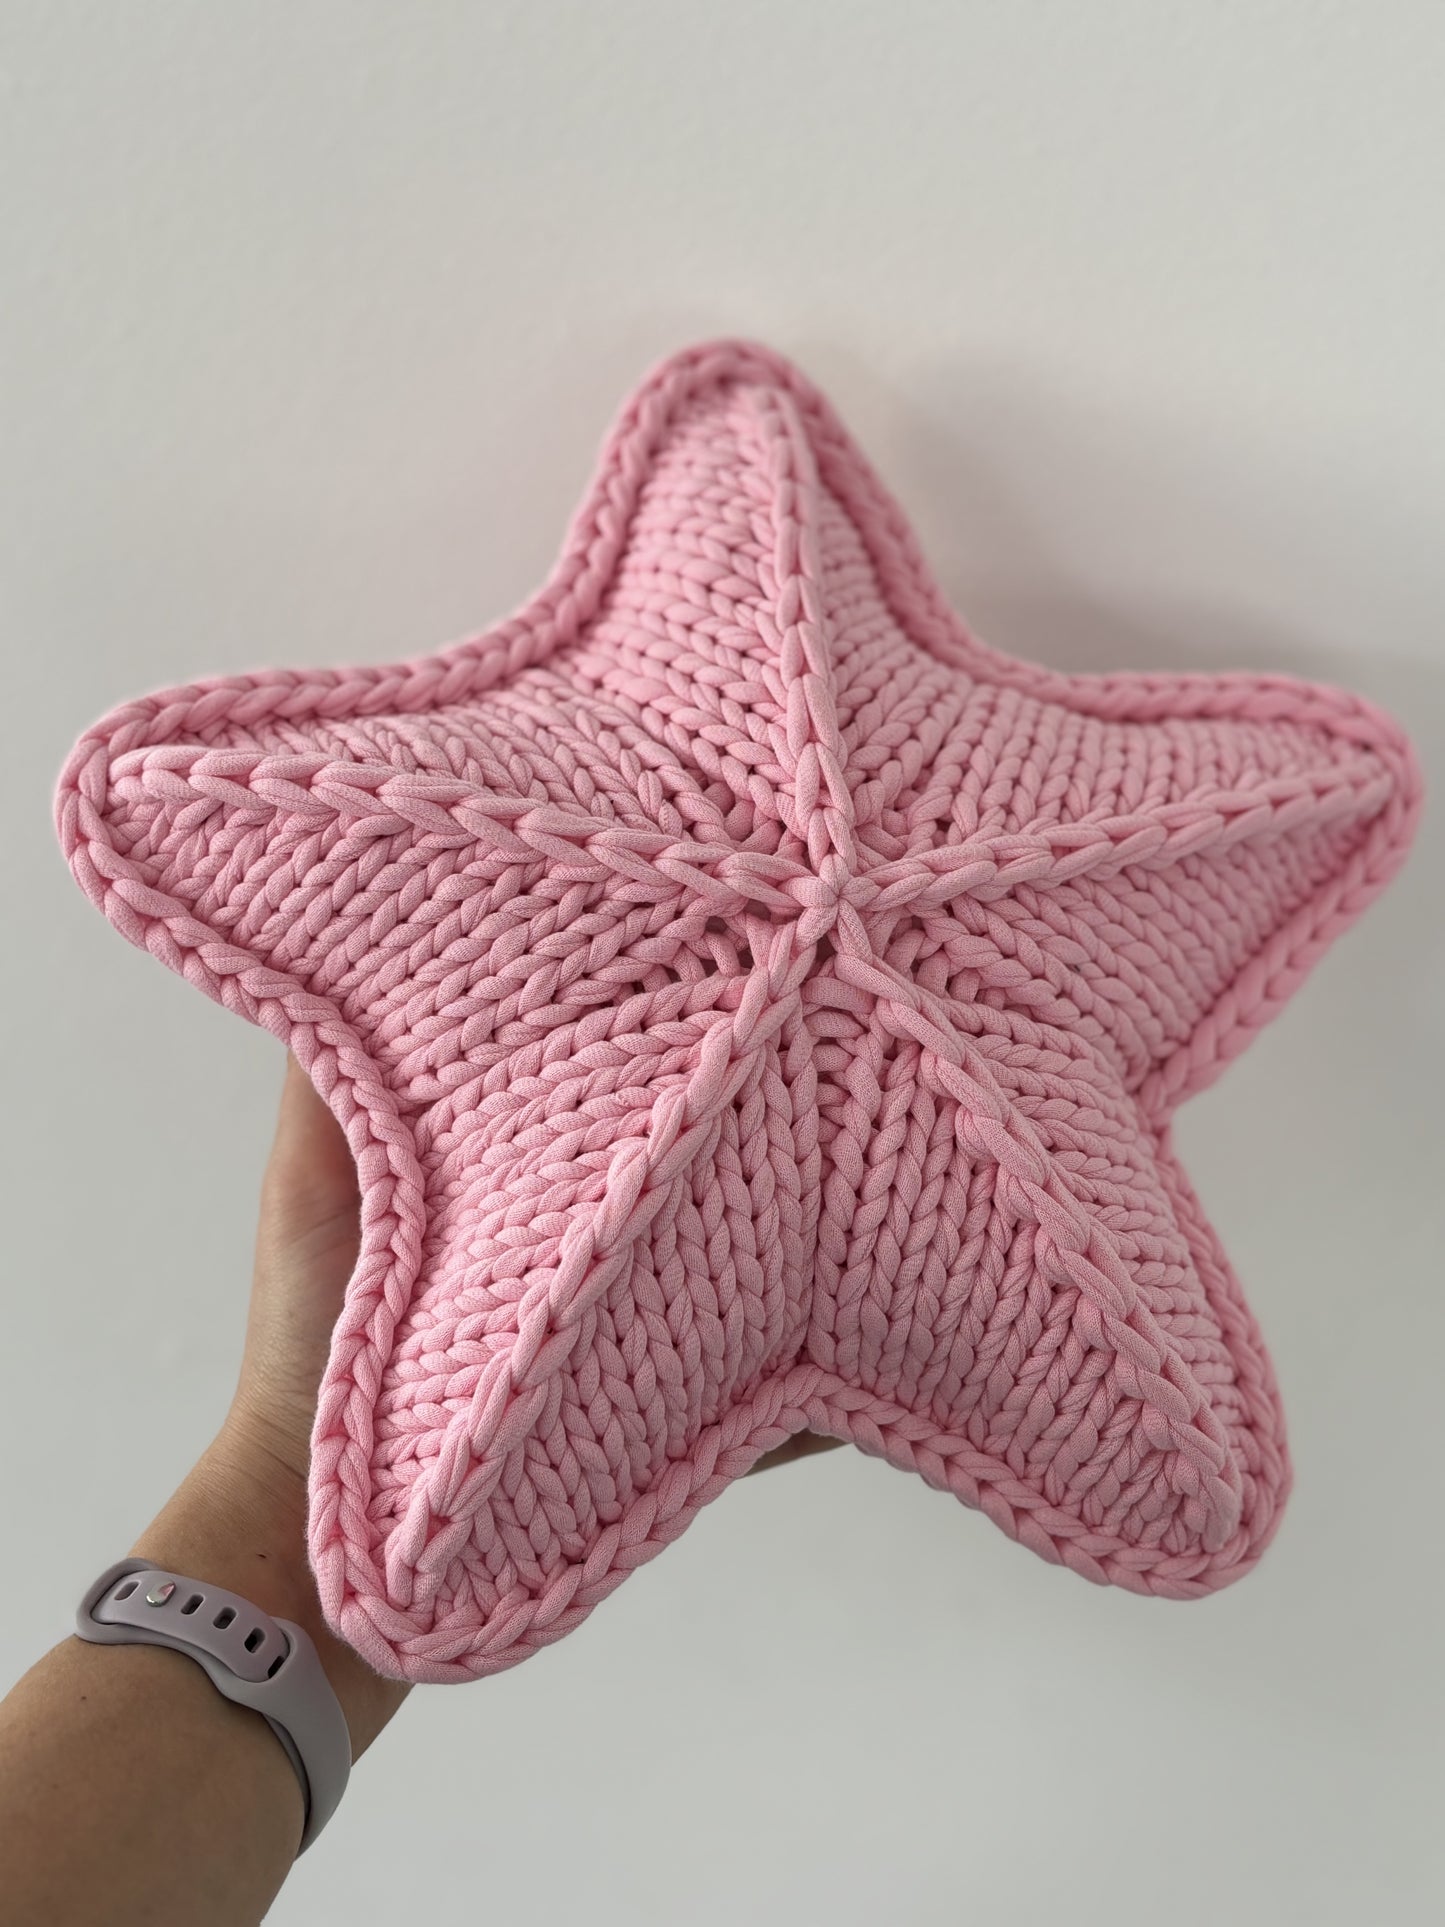 Decorative cushion star made from recycled cotton